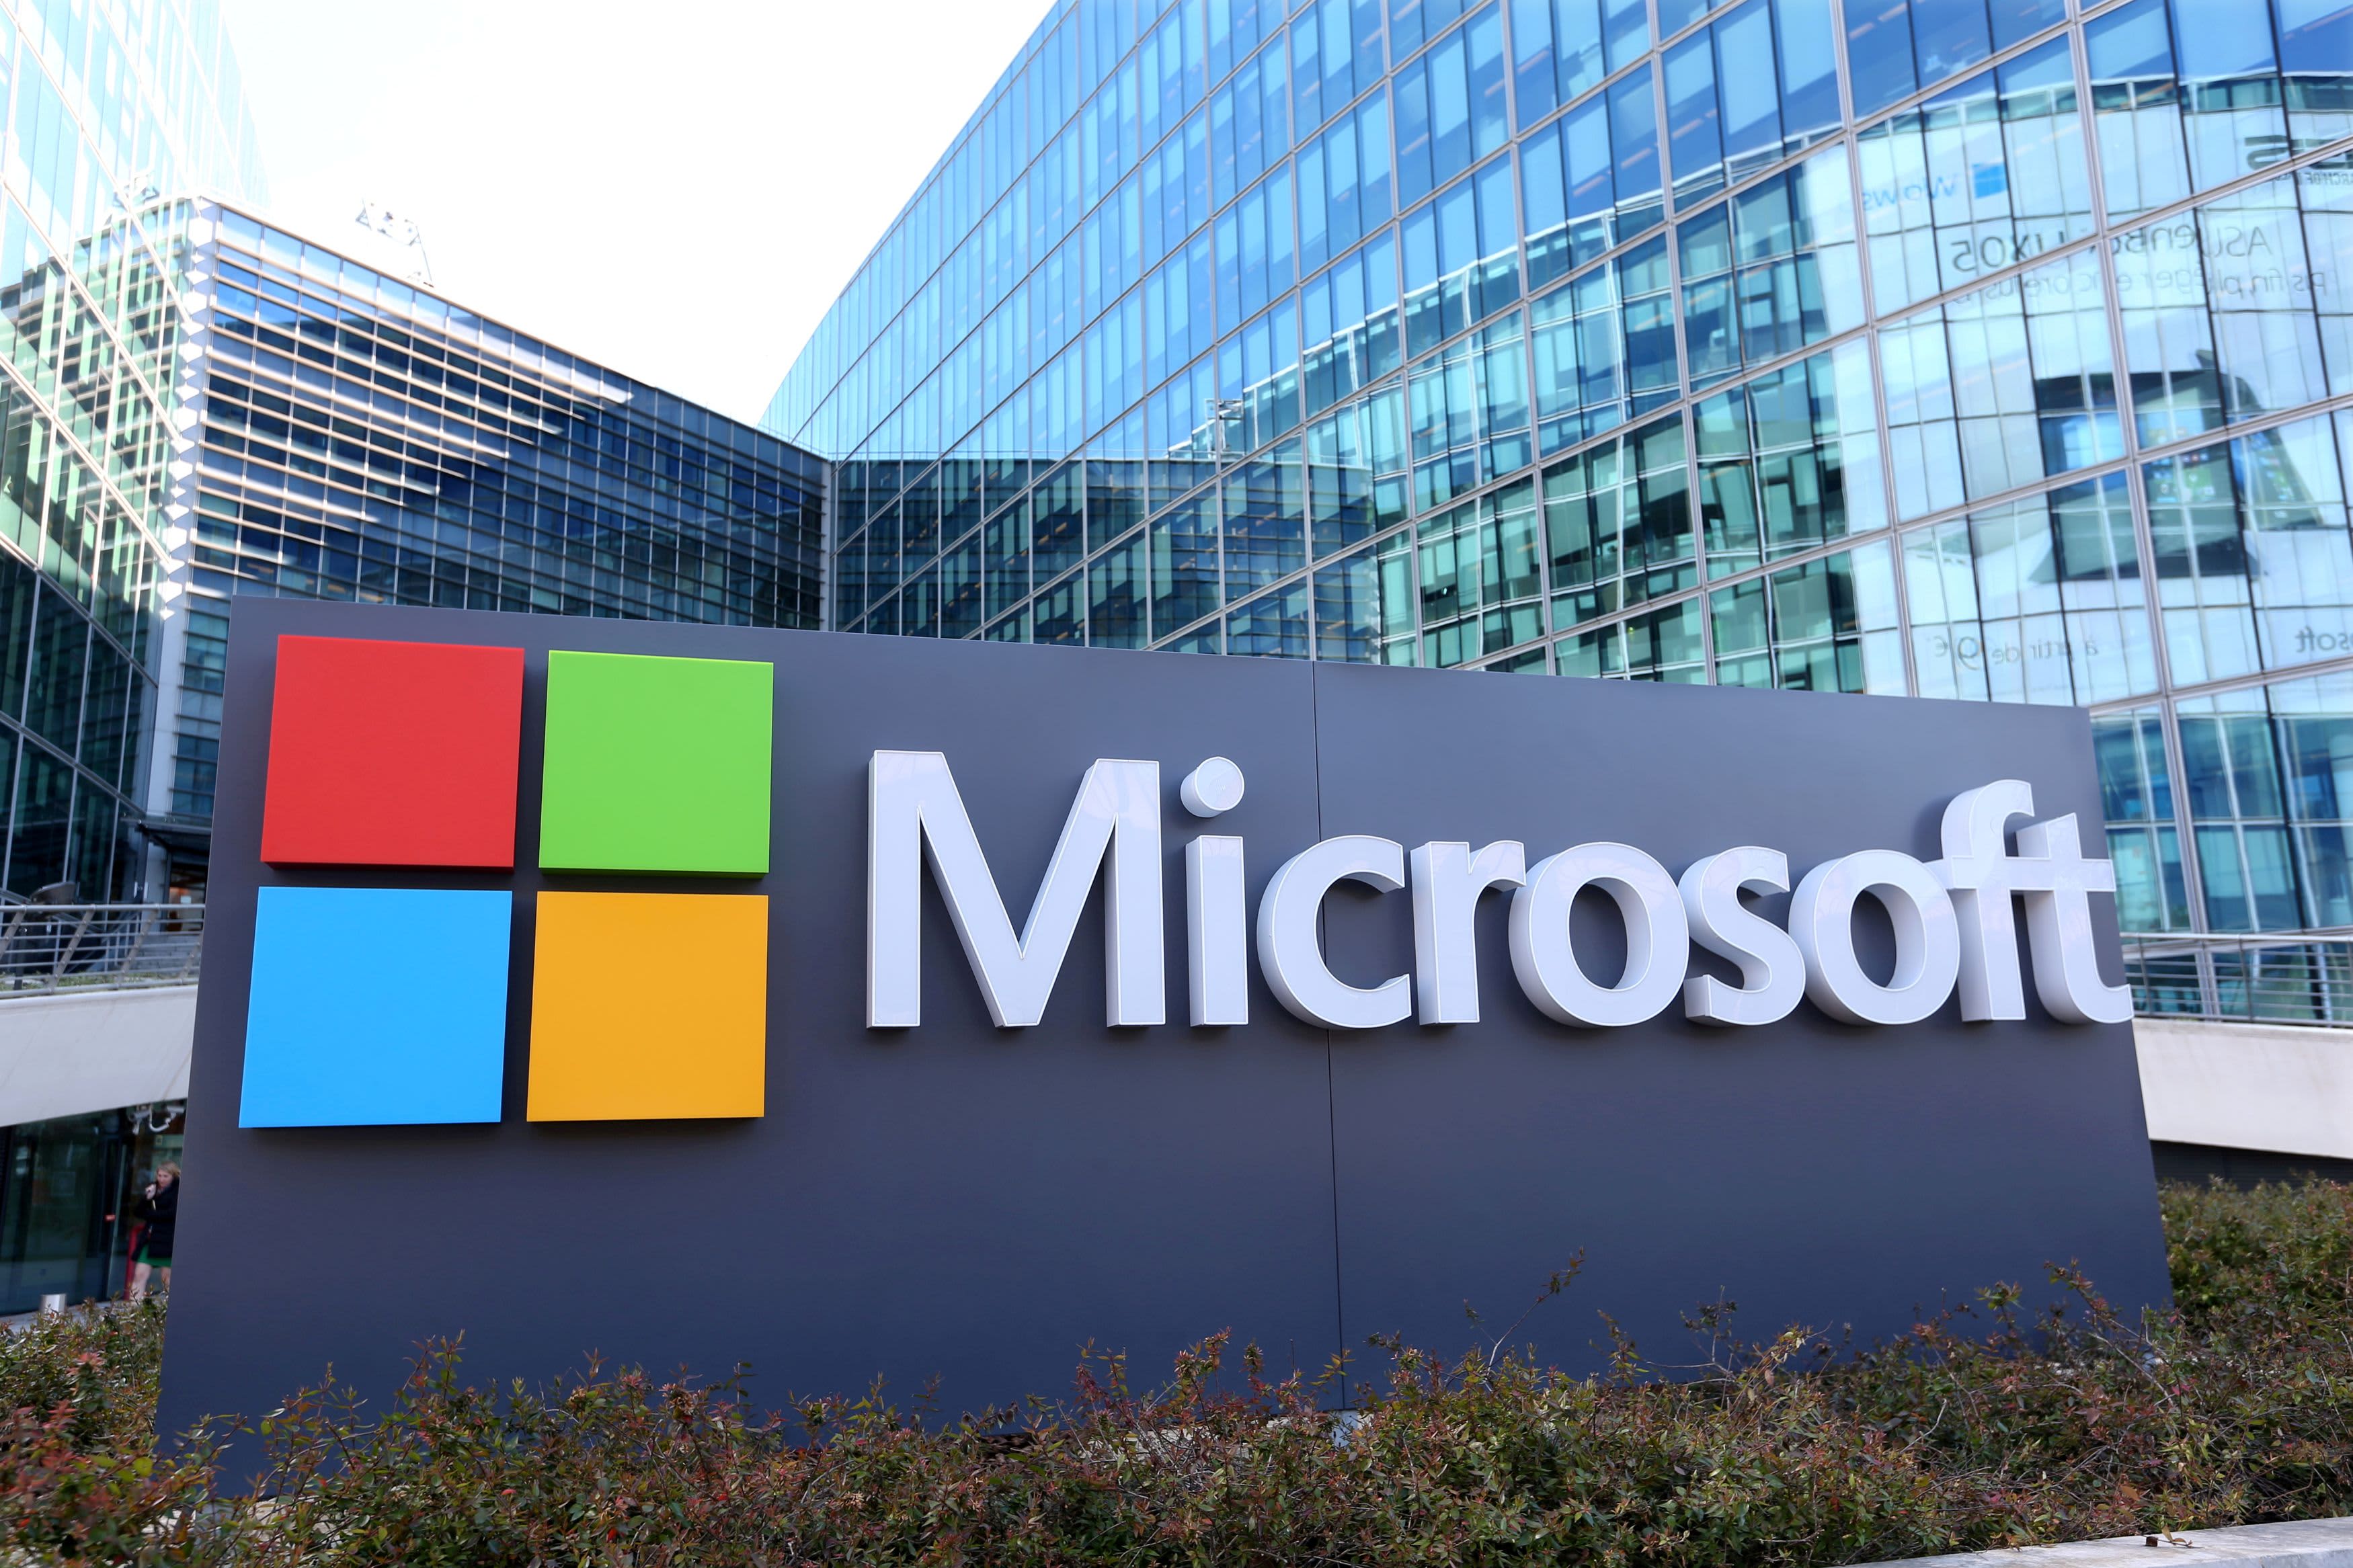 UBS downgrades Microsoft, cites weakening outlook for Azure and Office